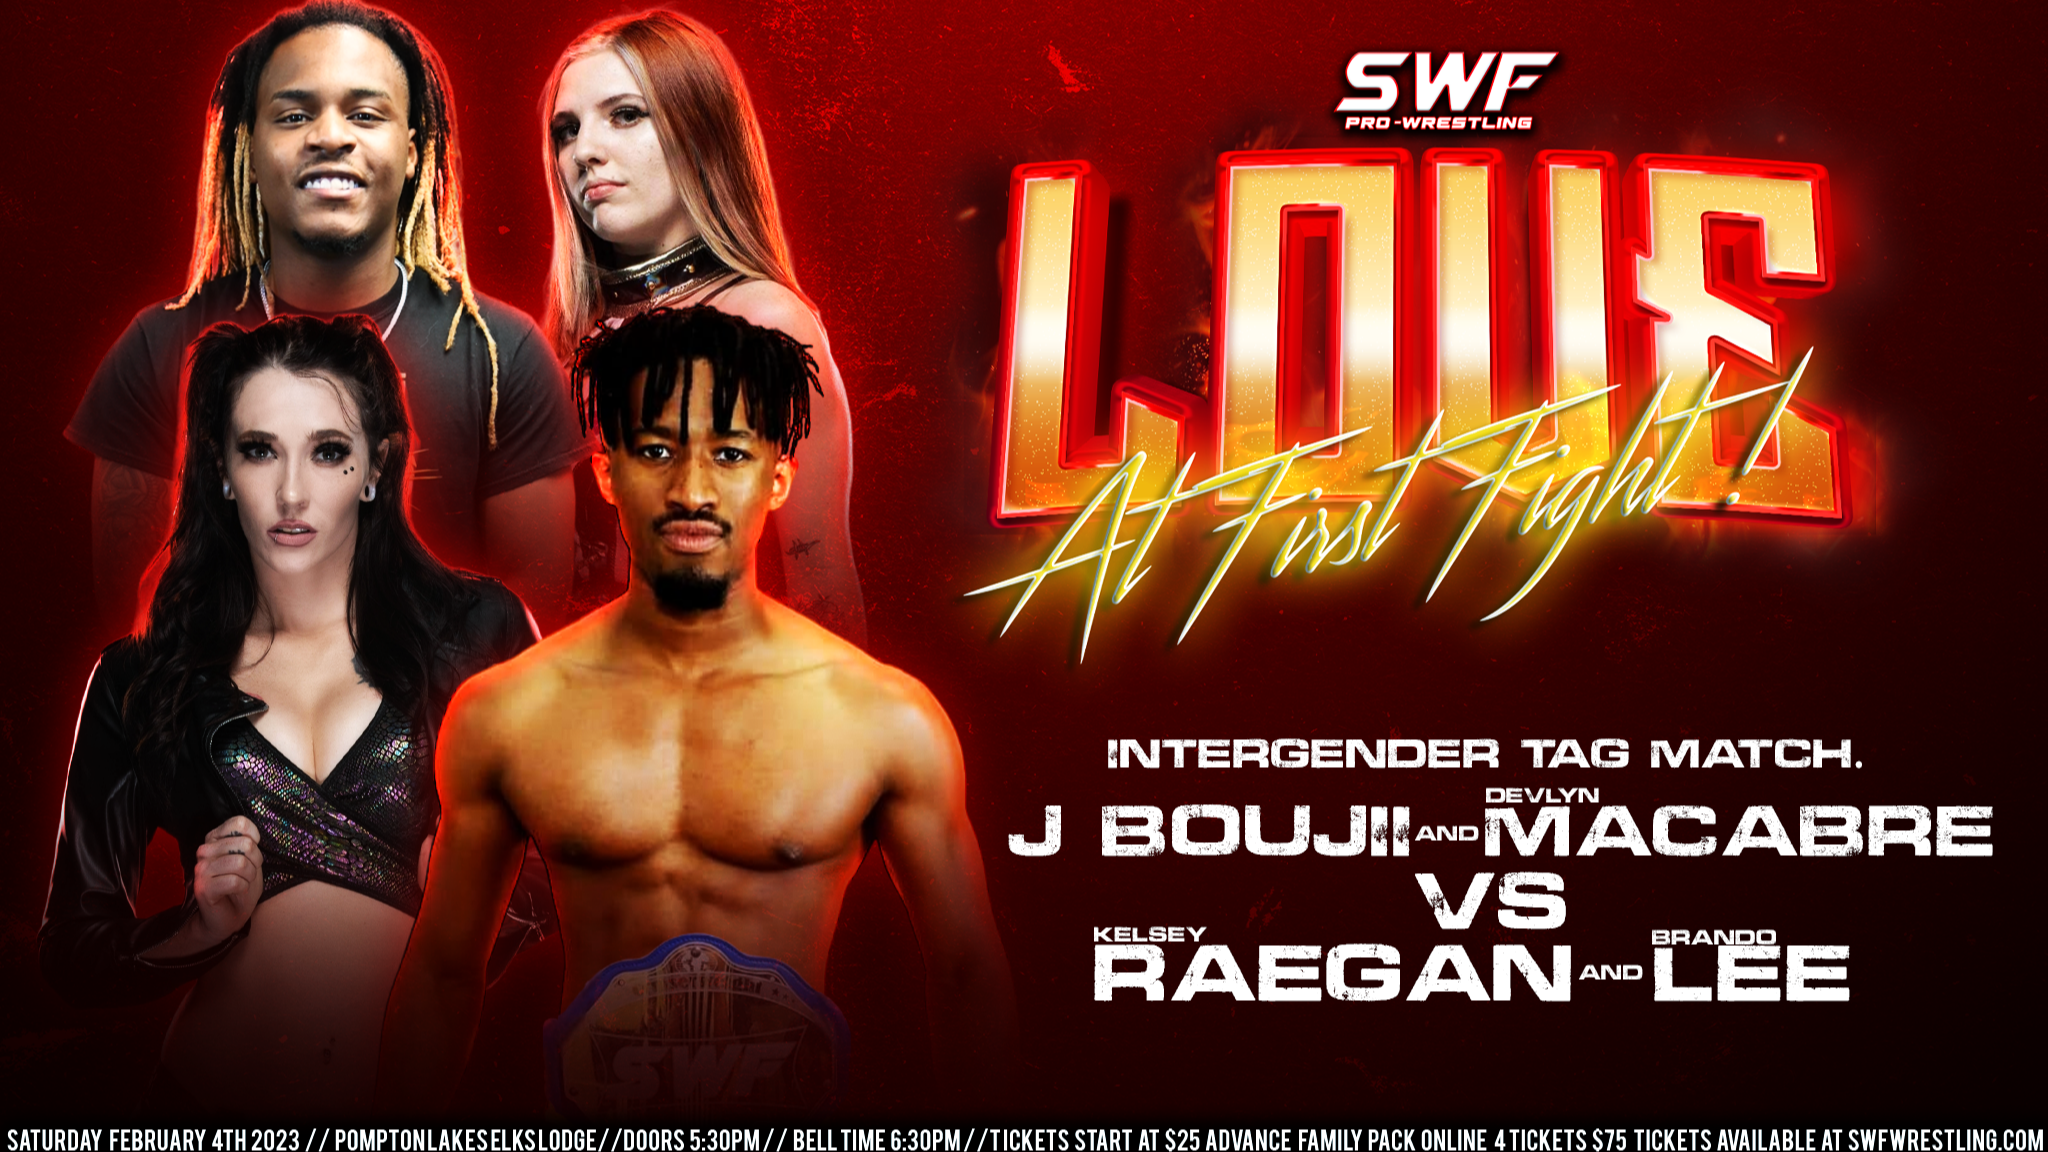 SWF presents Love At First Fight!